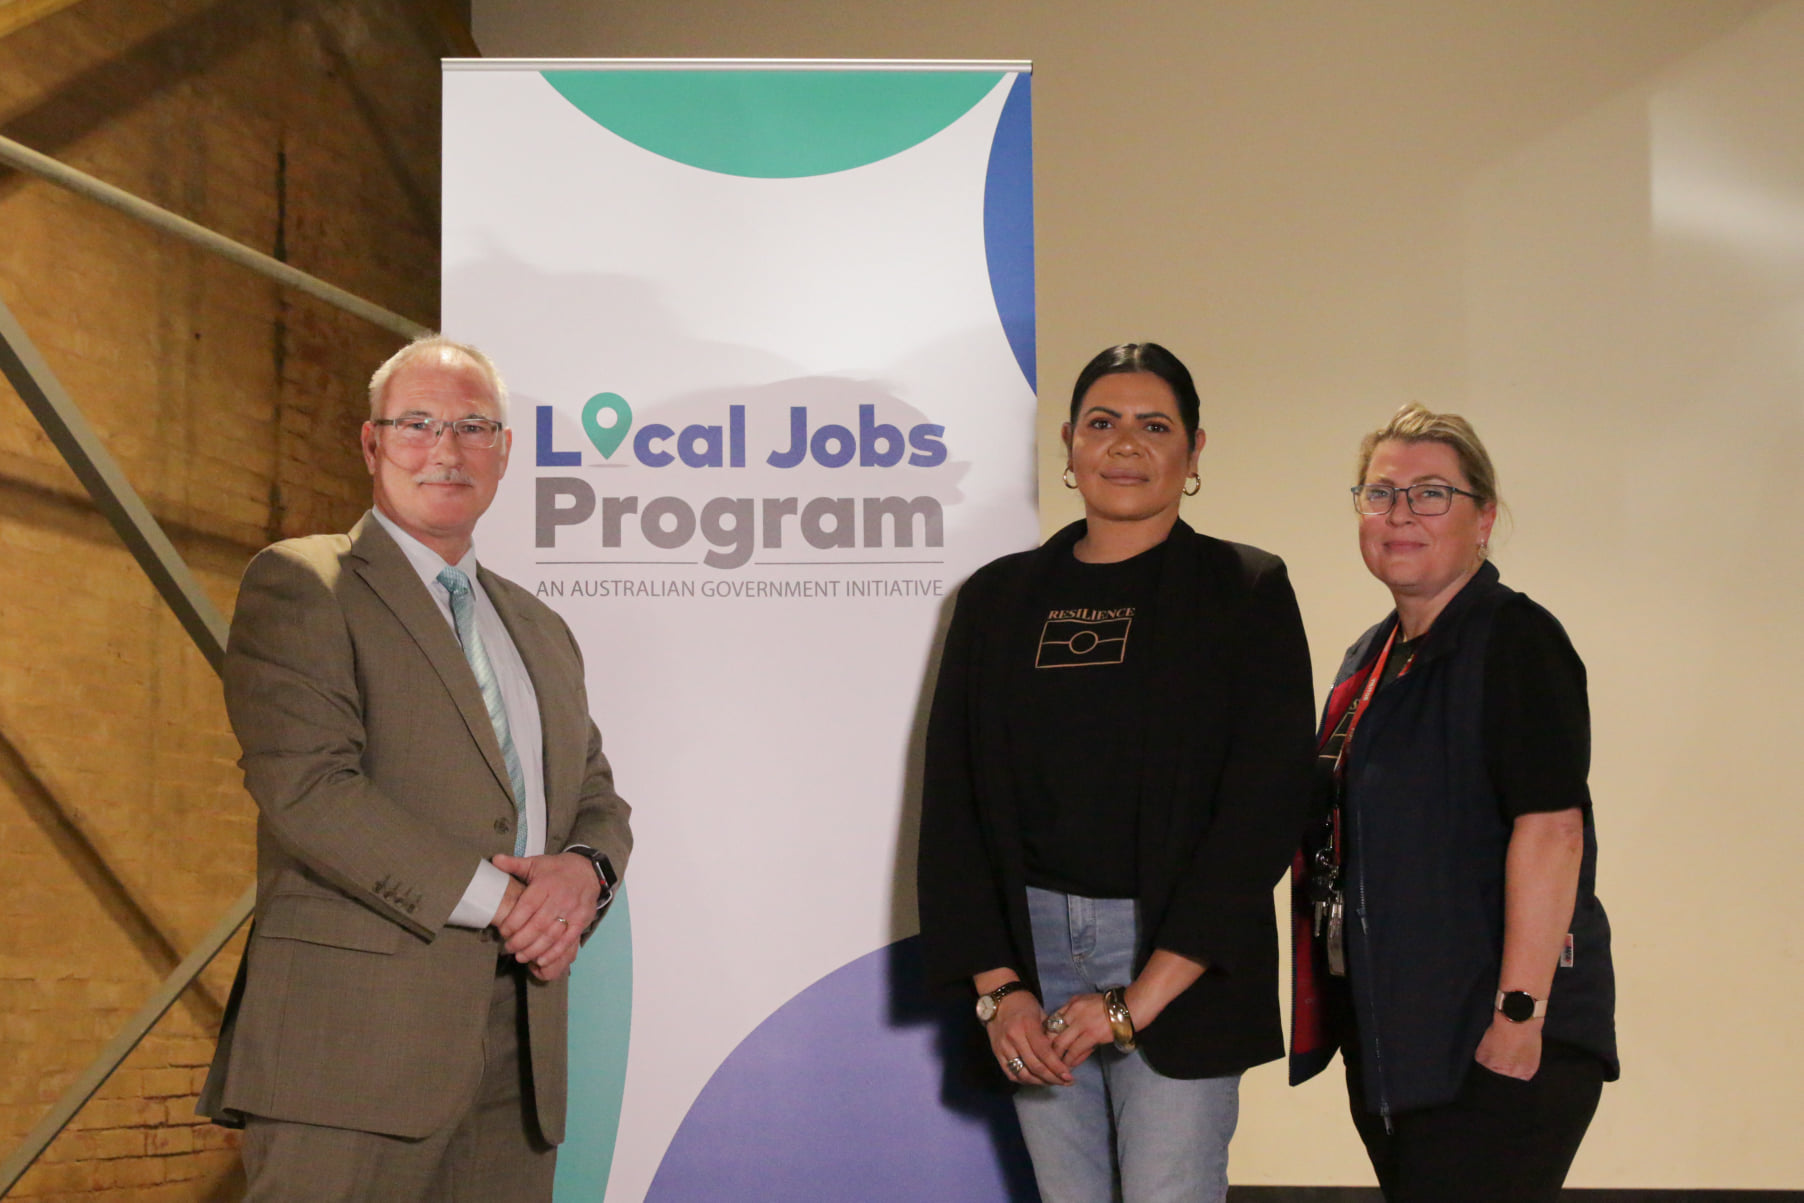 Paul Williams, Nicole Gollan and Michelle at the local jobs program NAIDOC Week 2021 event 